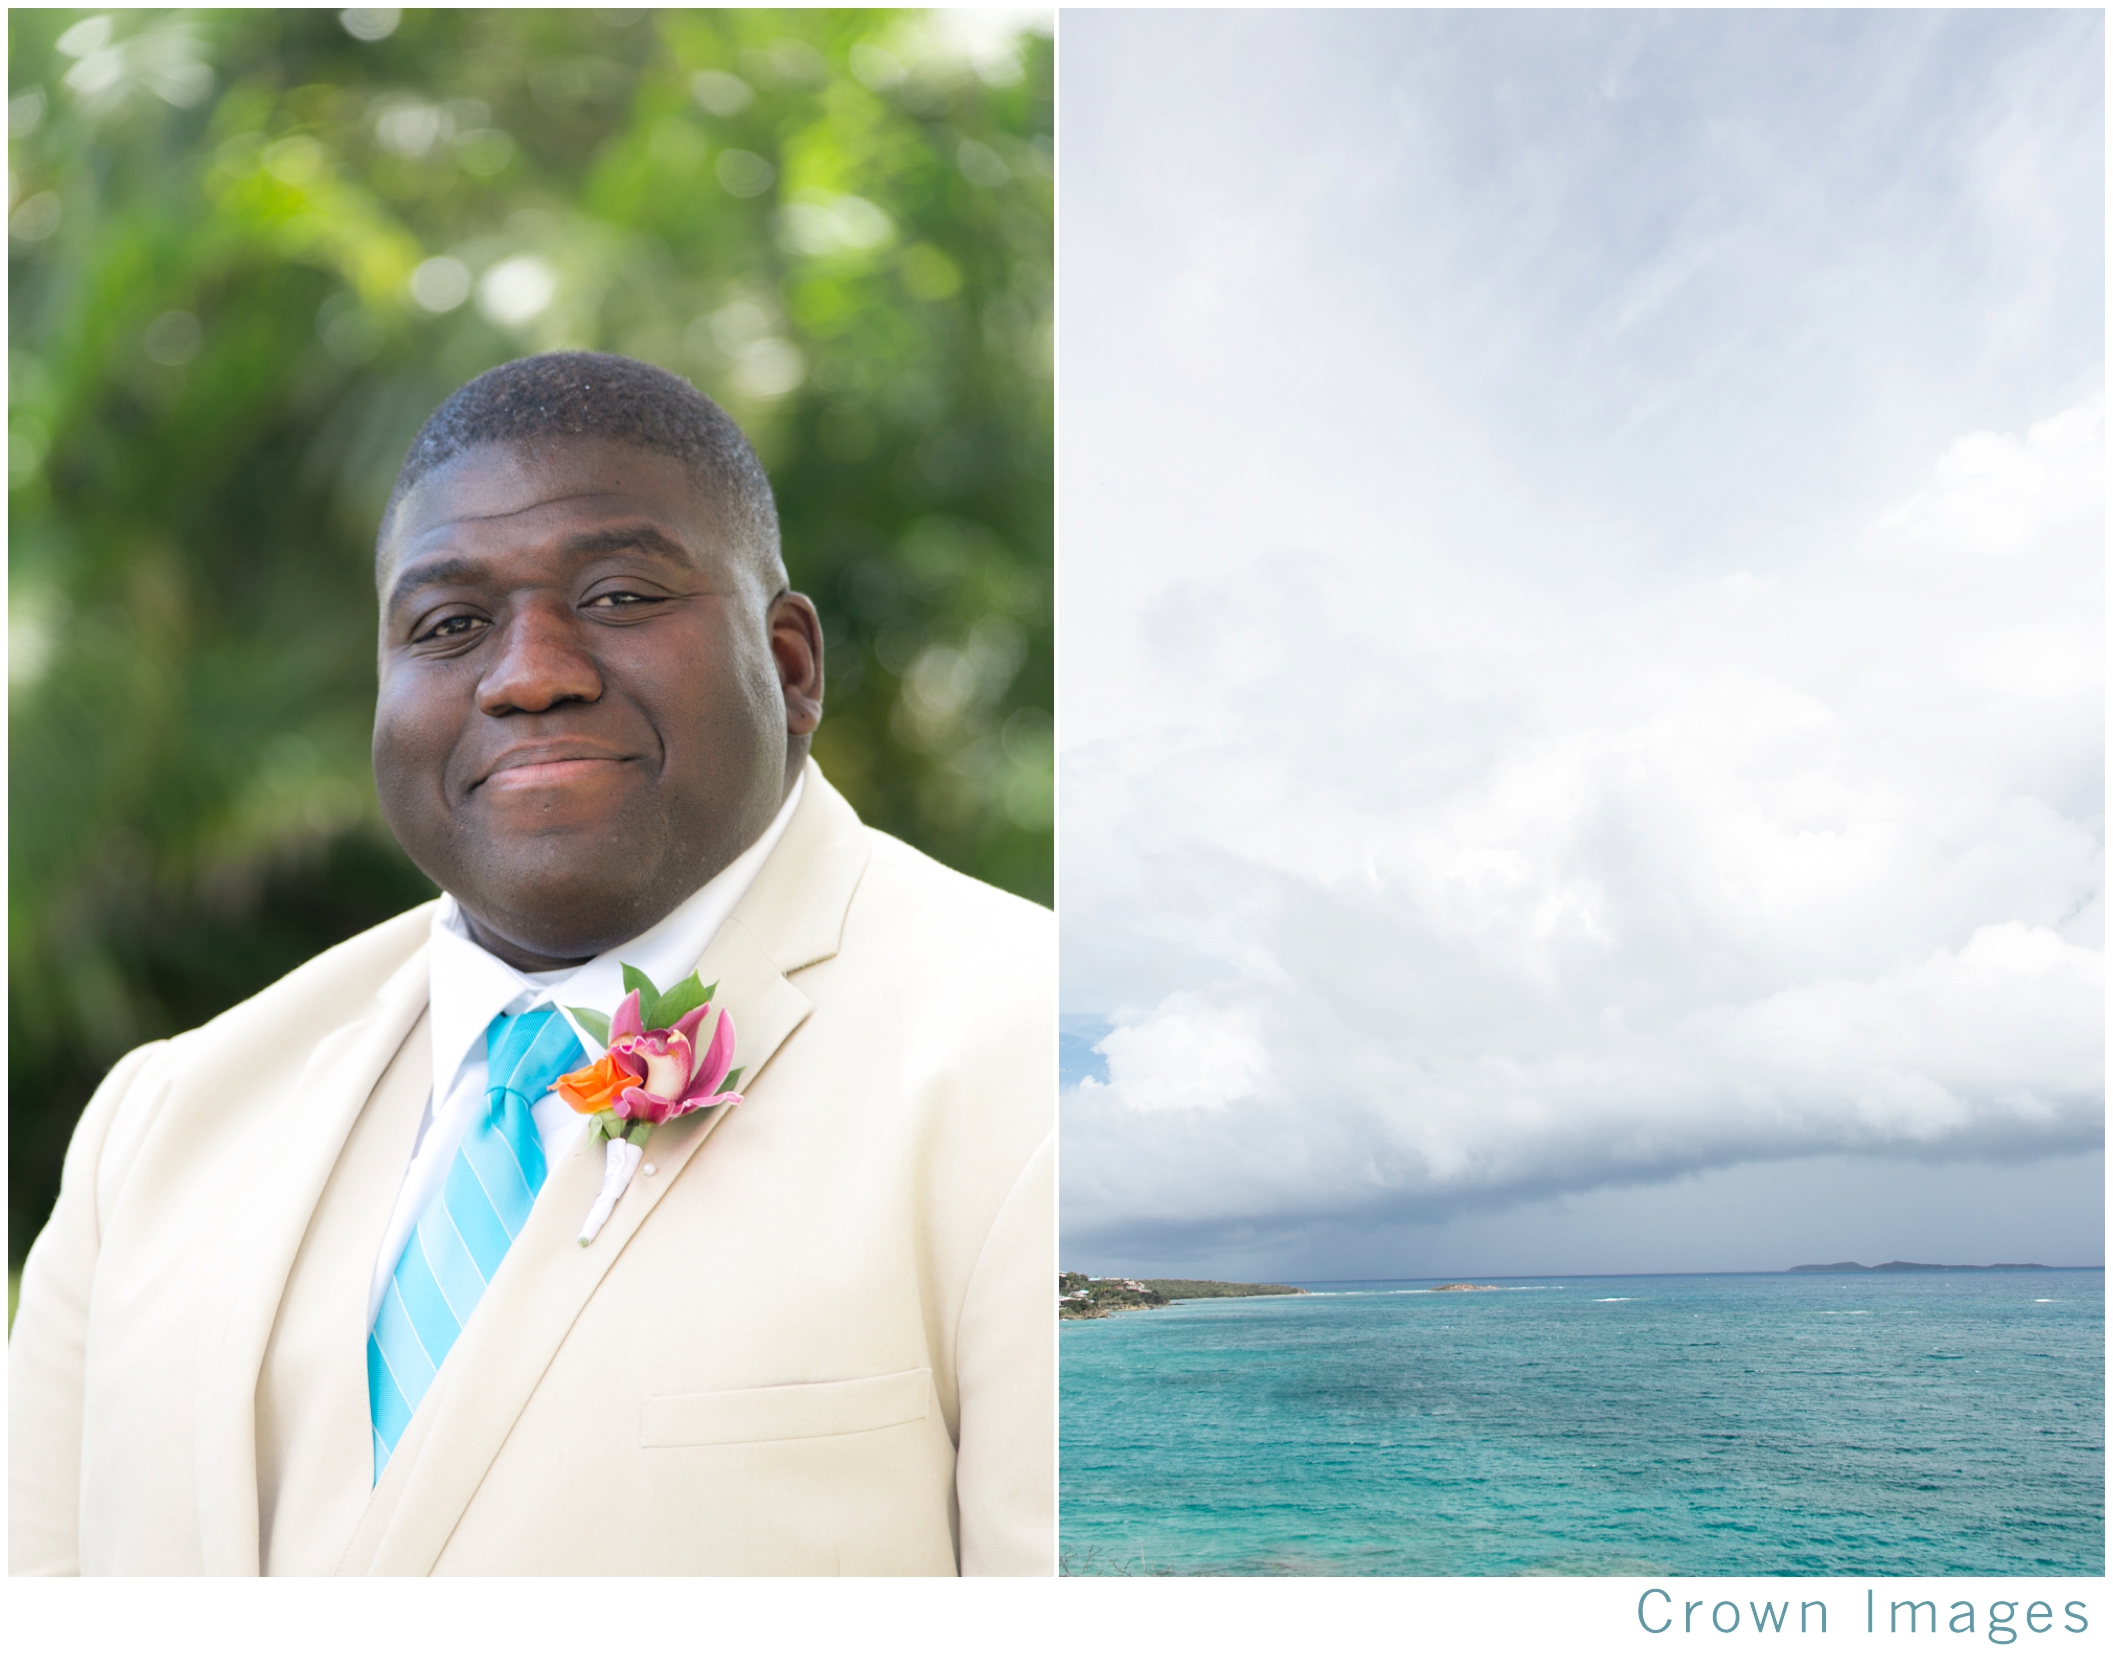 st thomas wedding photos at the marriott crown images_1699.jpg